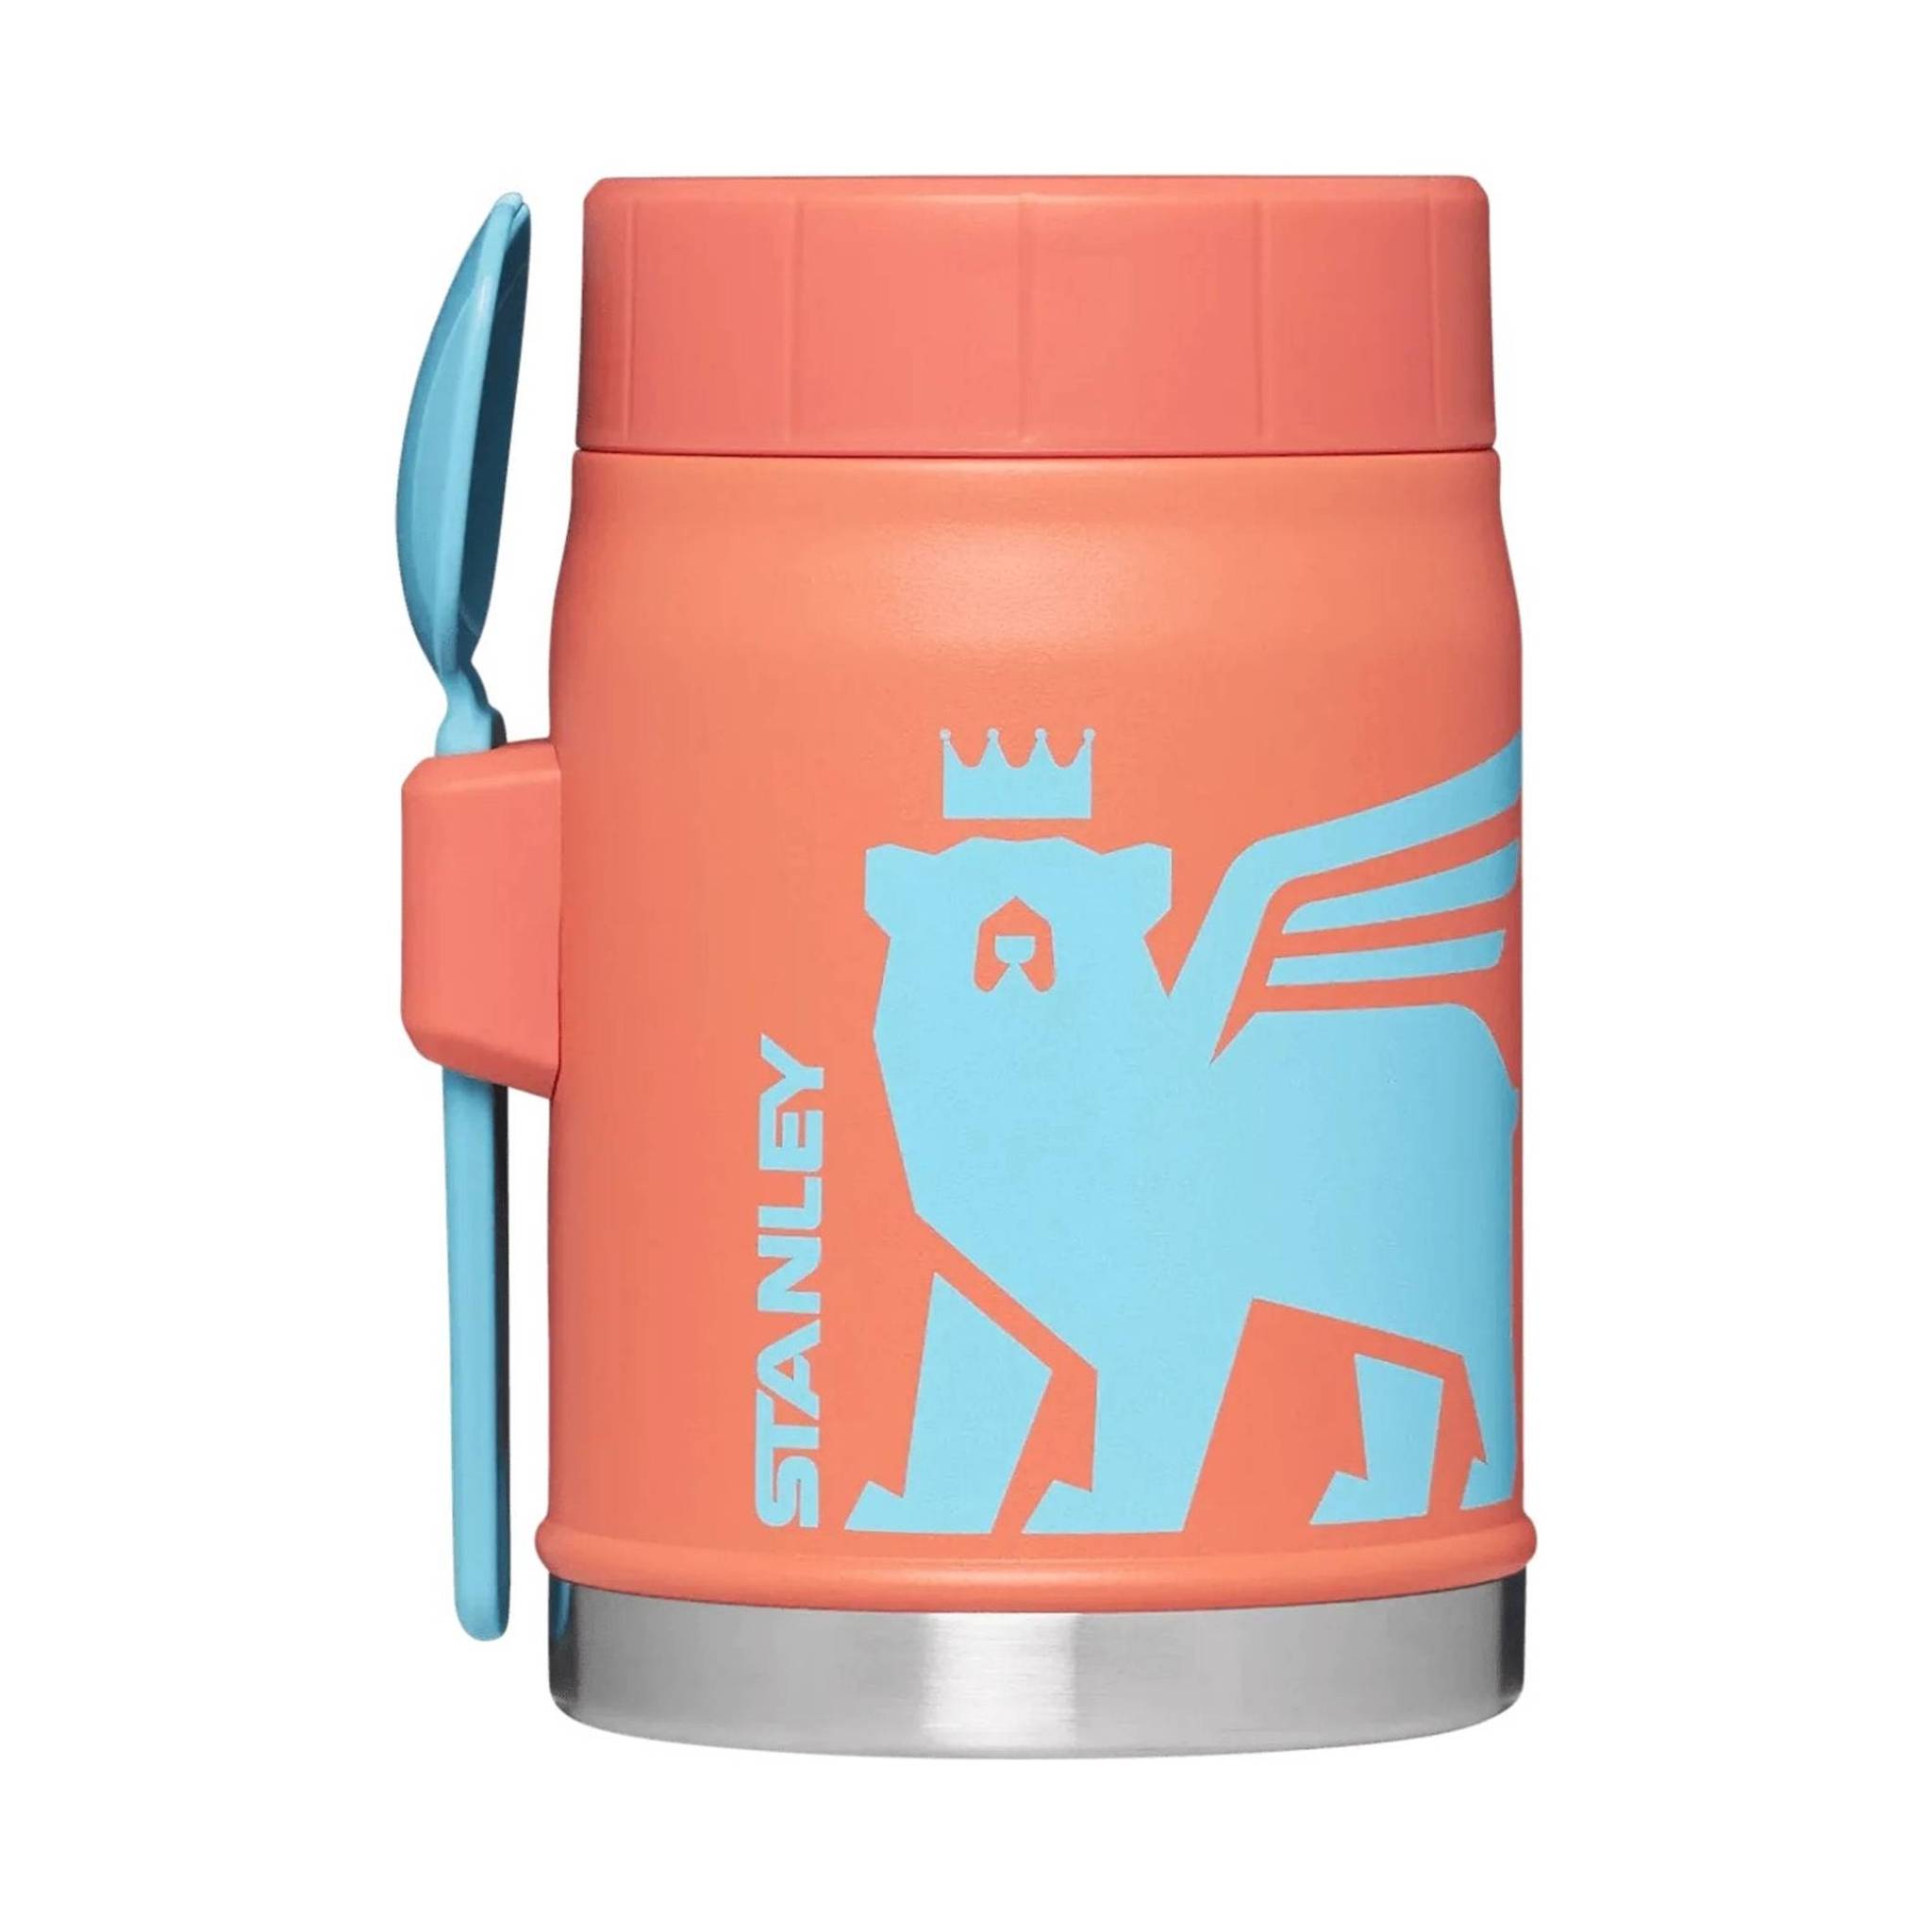 Stanley Adventure To Go Insulated Food Jar